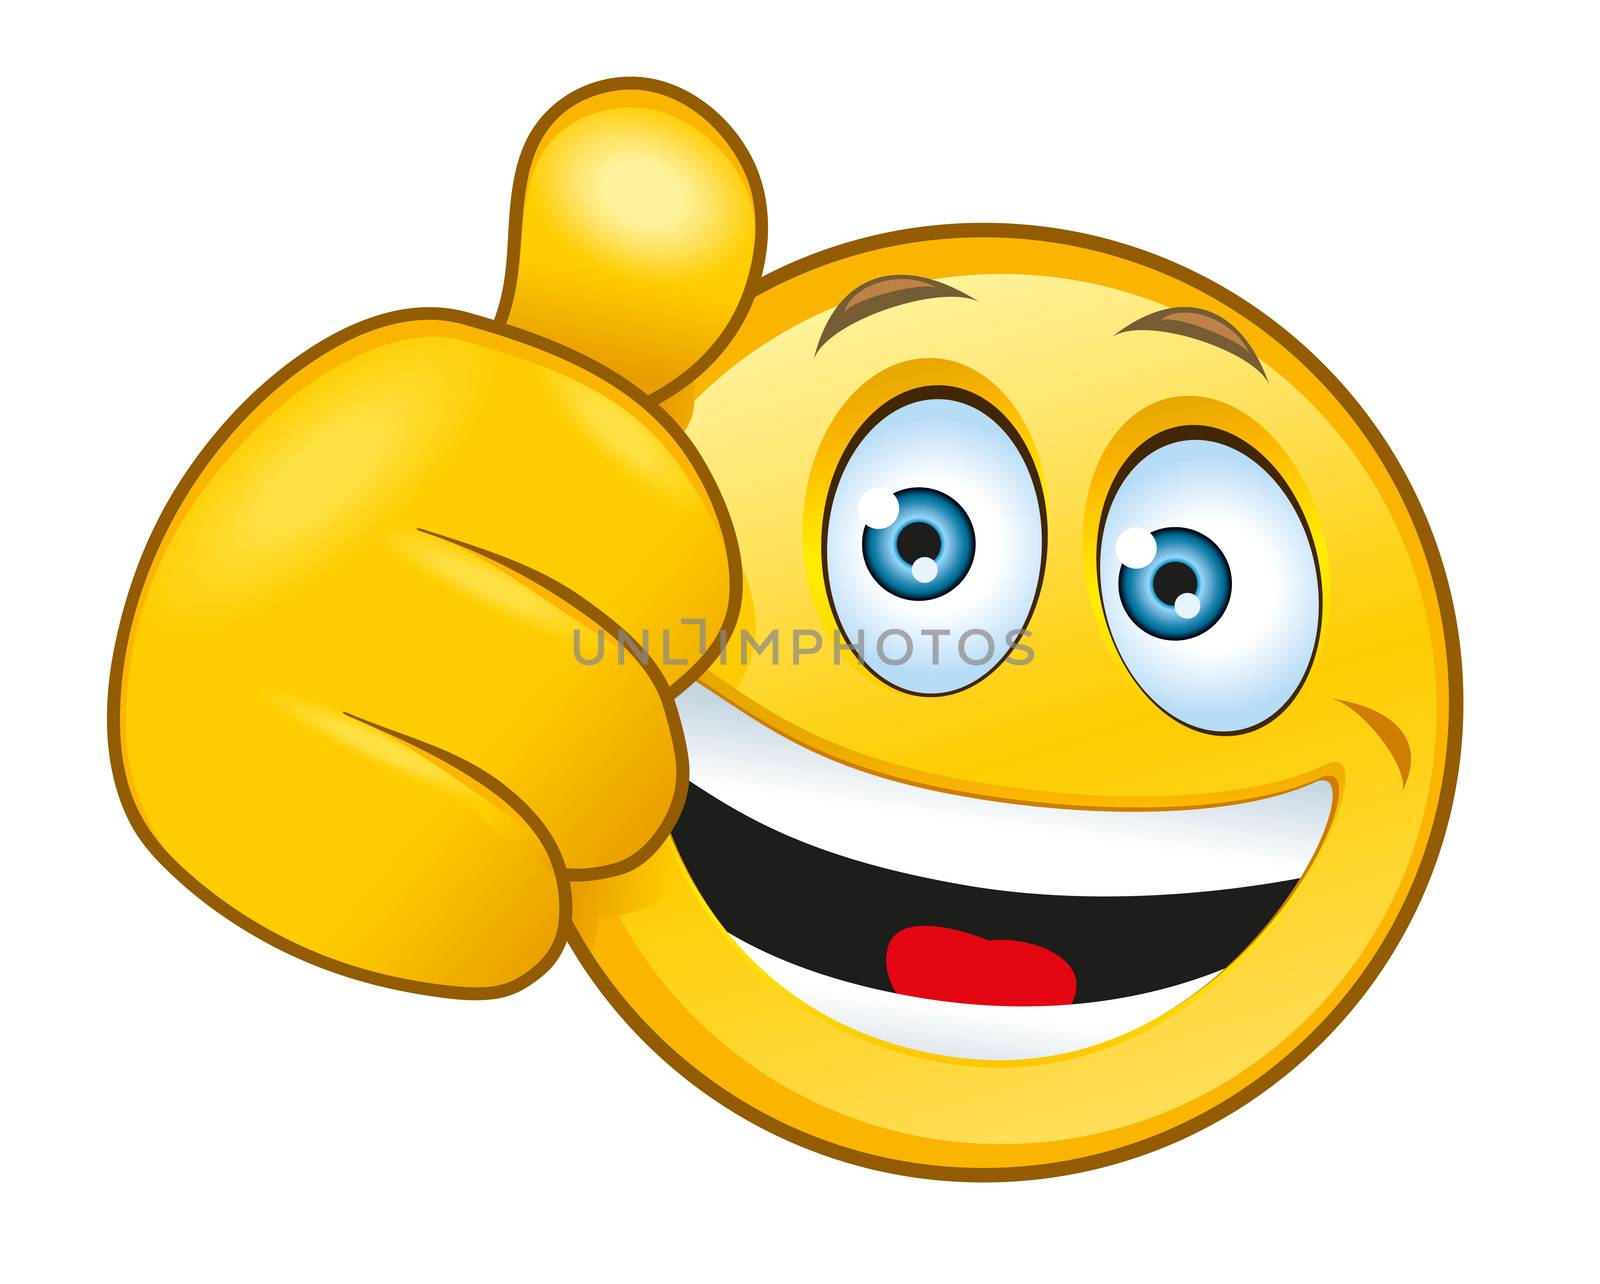 An illustration of a laughing smiley with a thumbs up sign